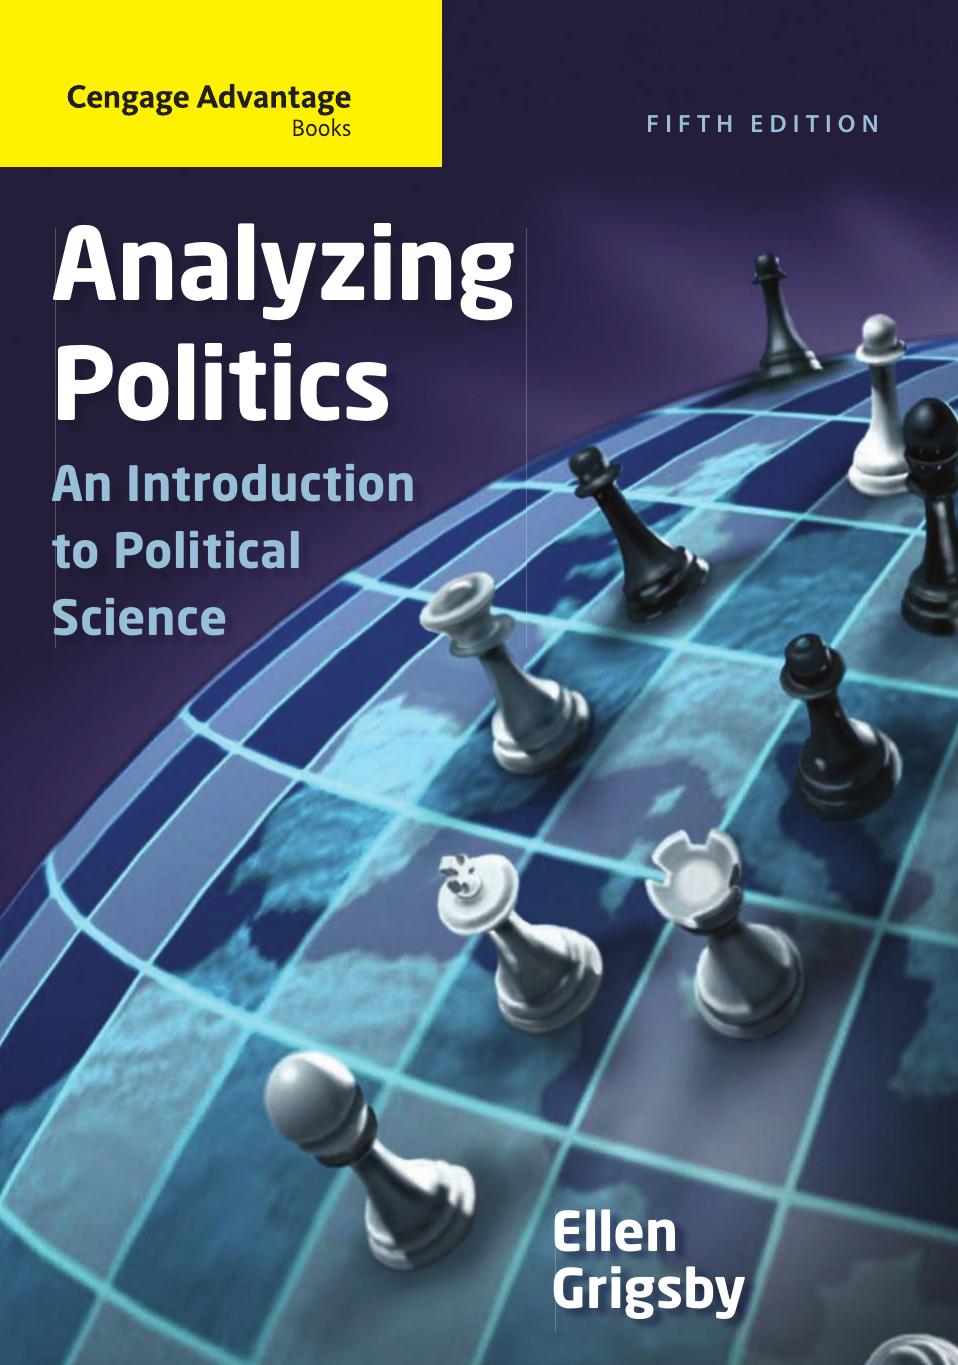 Cengage Advantage Books: Analyzing Politics: An Introduction to Political Science, 5th ed.